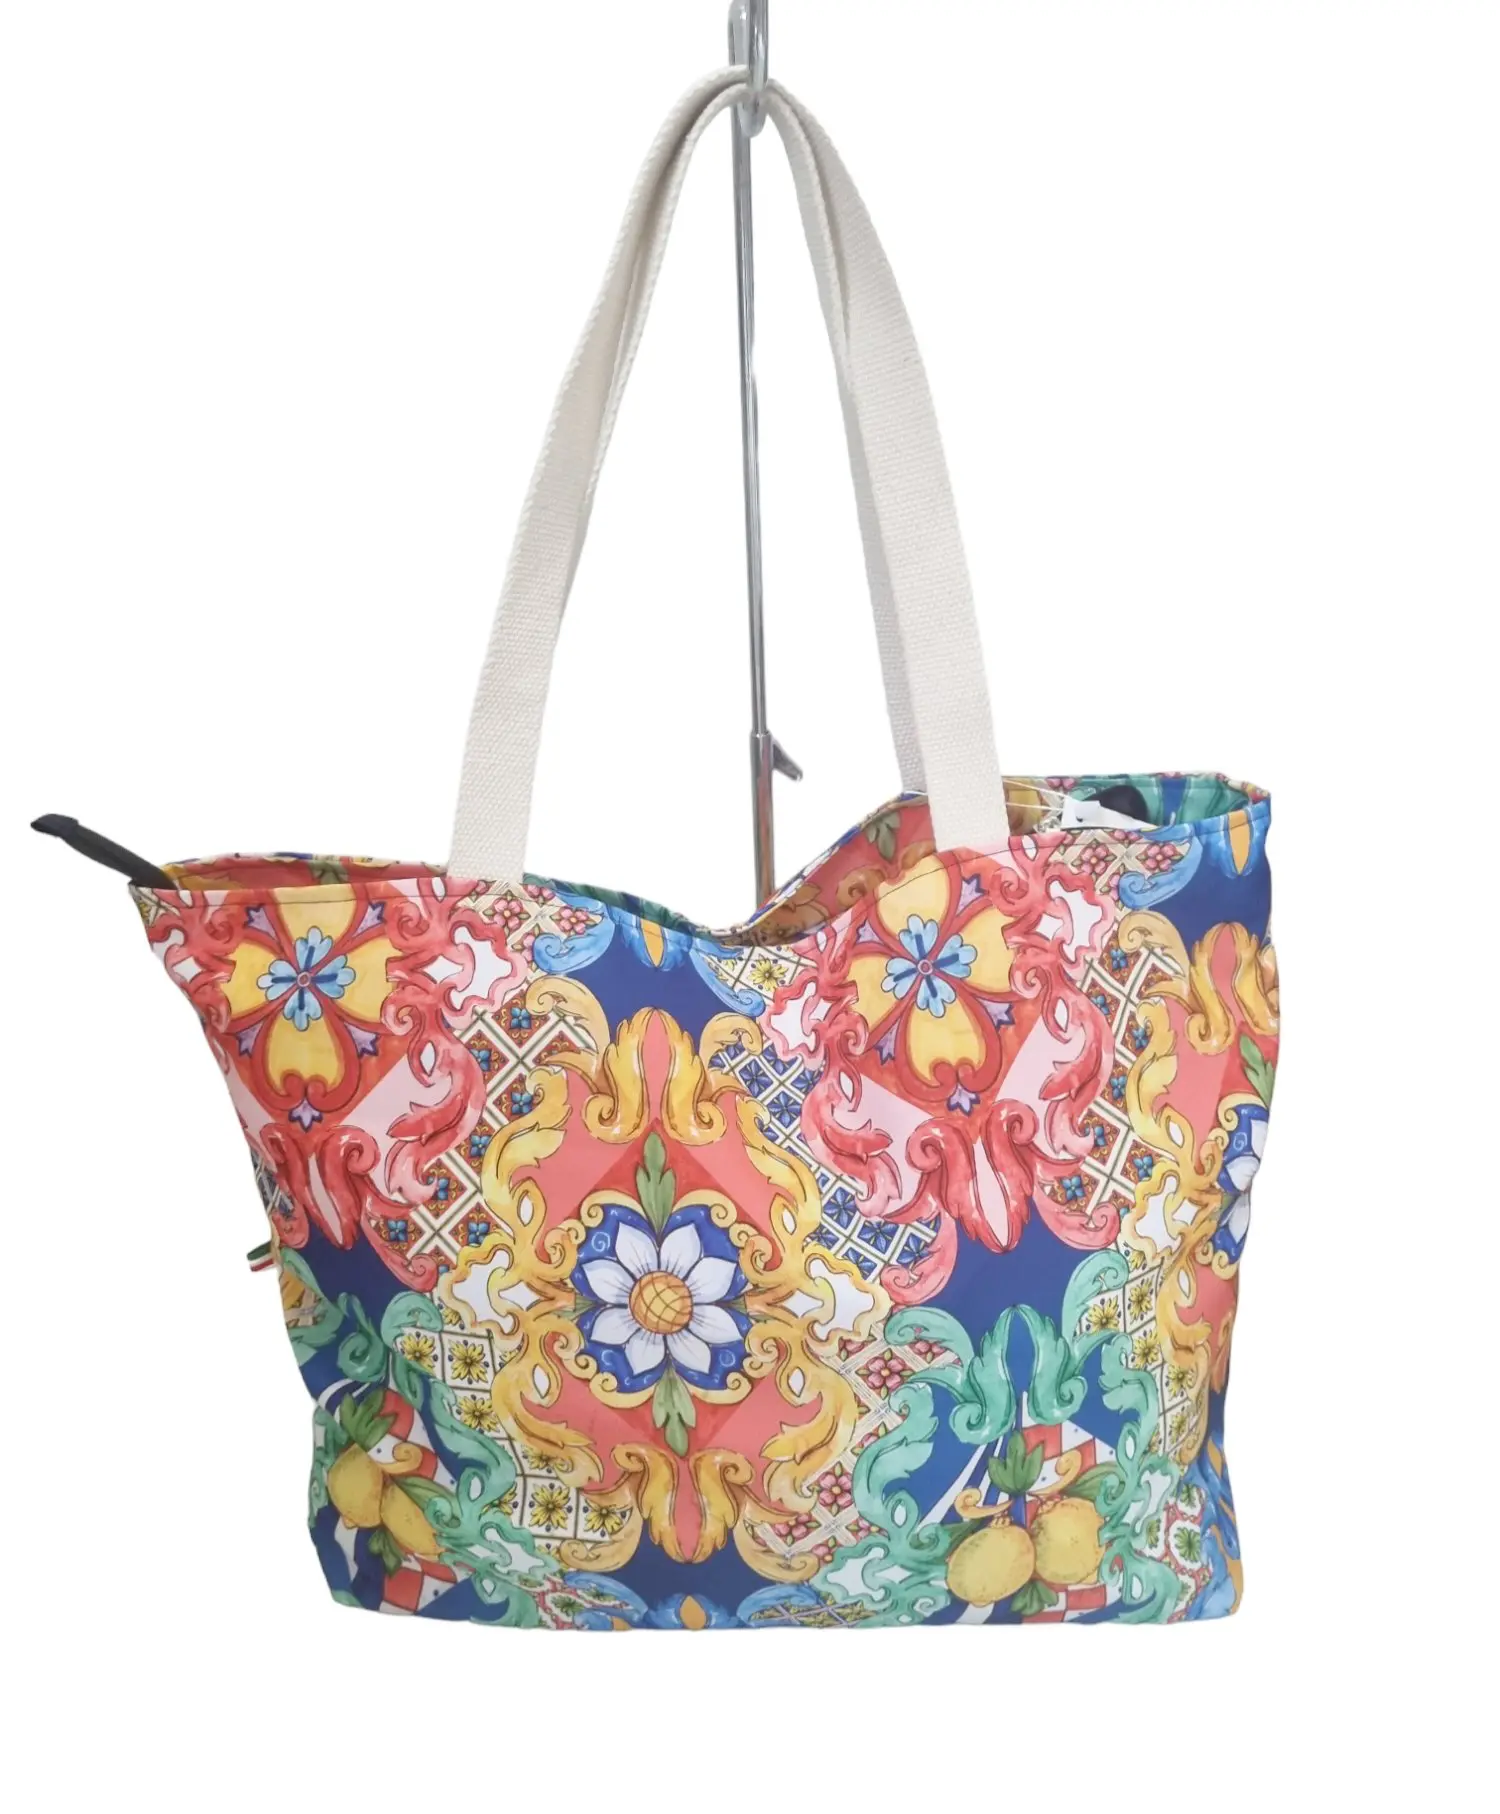 Large Beach Shopper Bag in Polyester with Zip Closure - Women's Rosalia Pattern